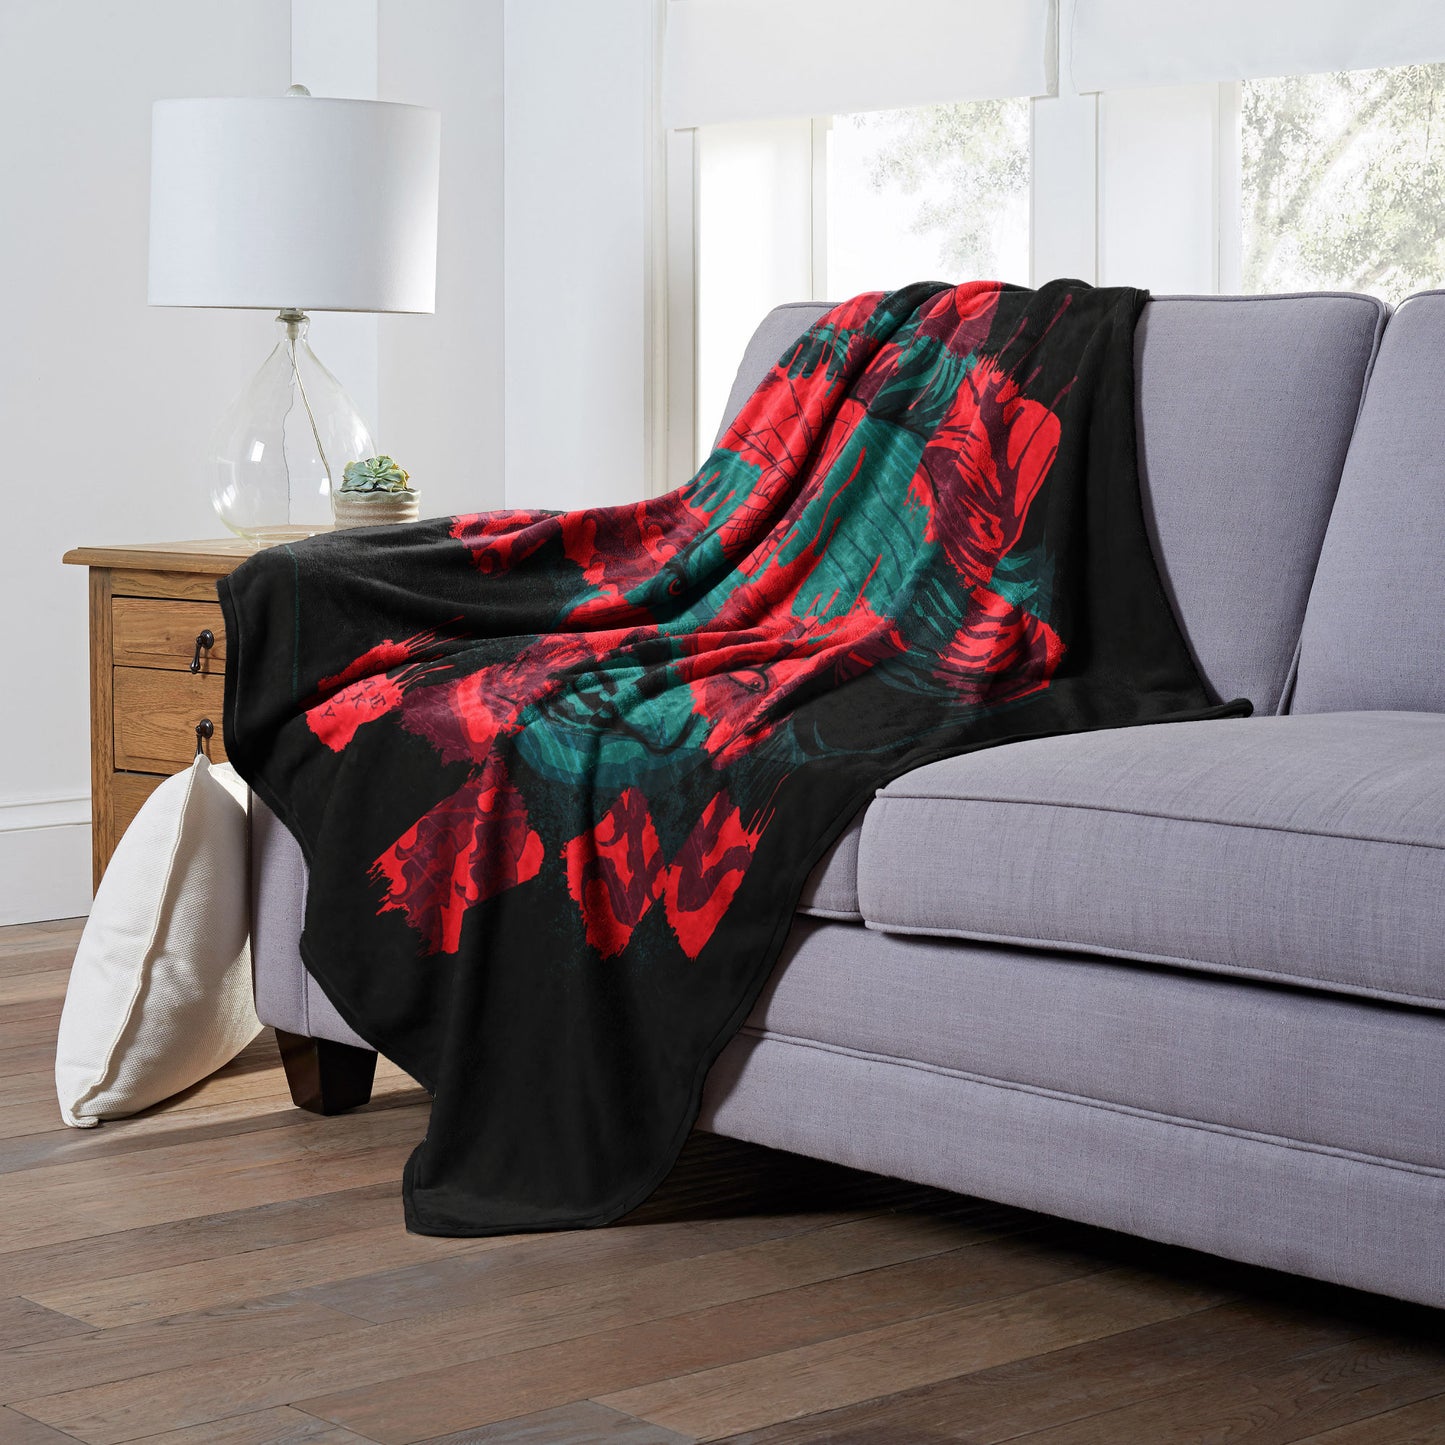 IT 2 Come and Play Throw Blanket 50"x60"